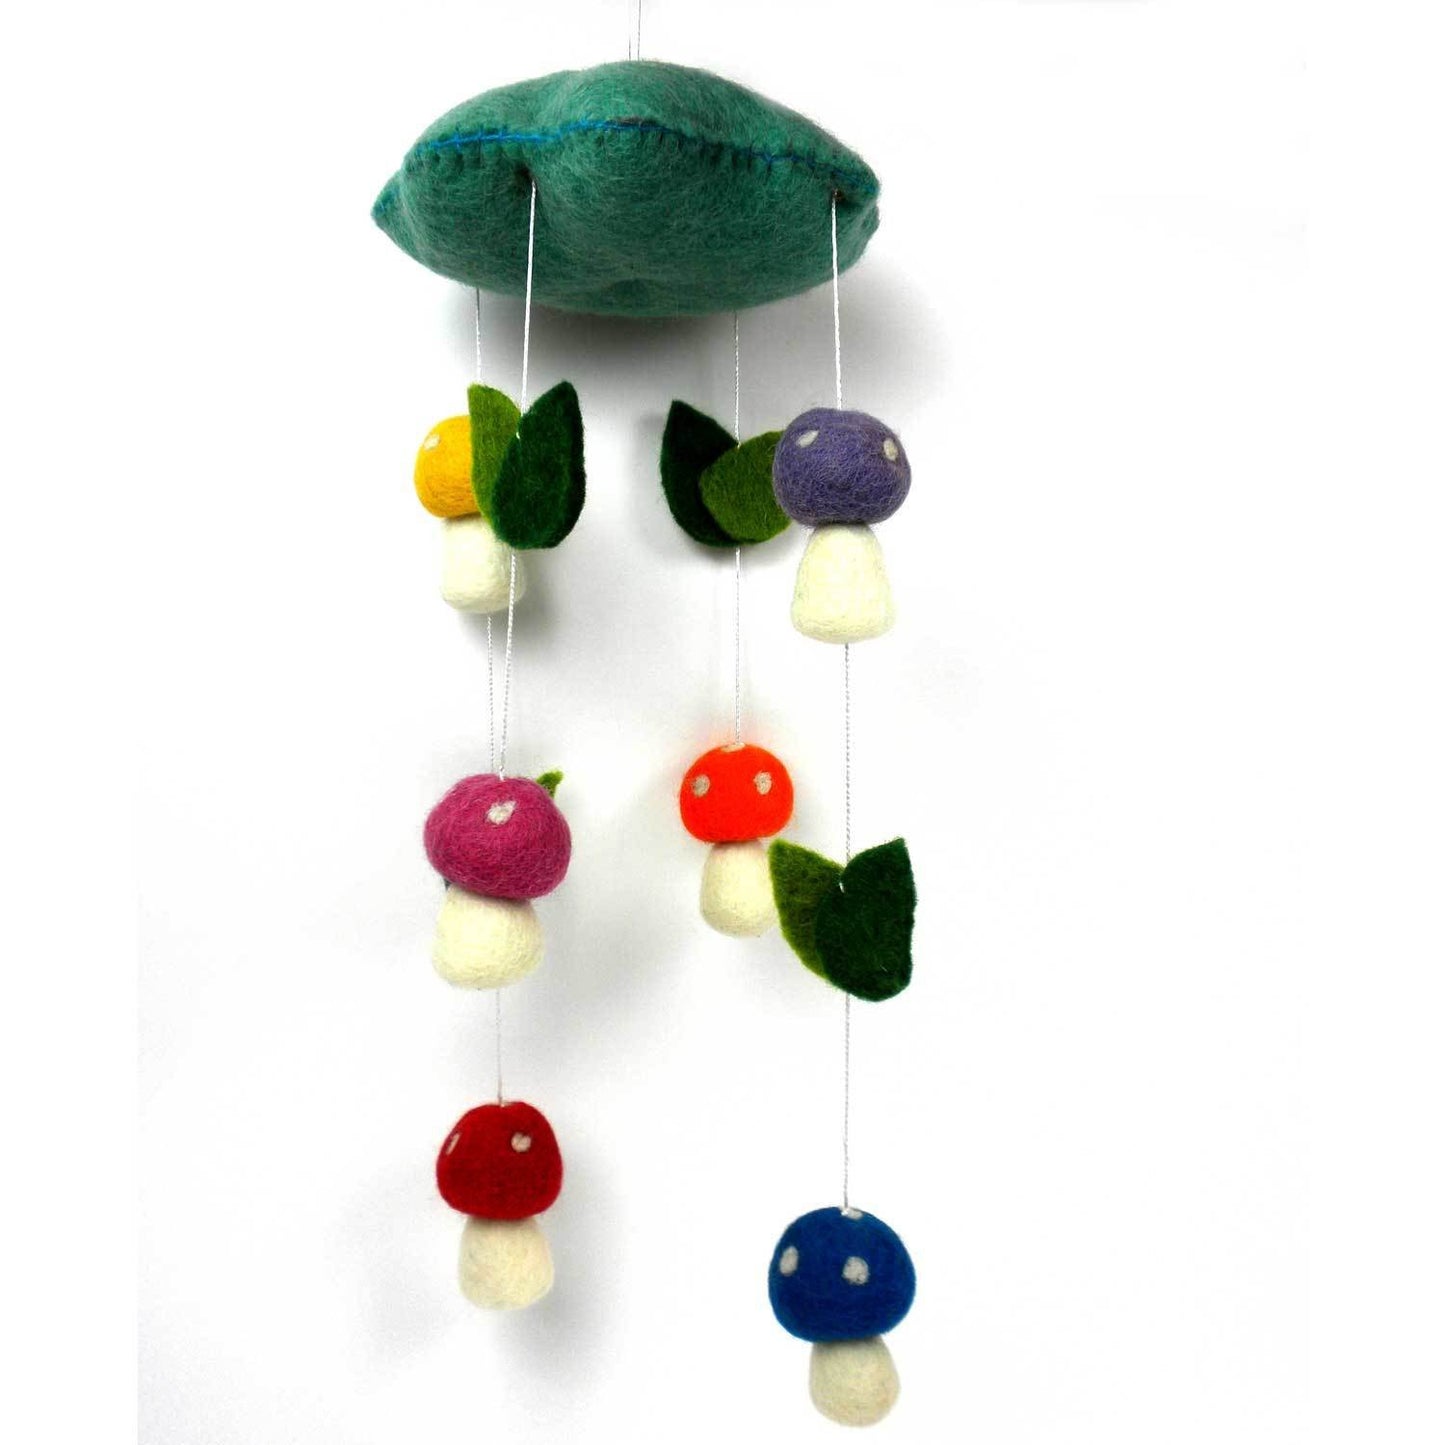 This Global Groove Life, handmade, ethical, fair trade, eco-friendly, sustainable, Blue felt mobile, with yellow, pink, red, orange, purple and blue mushrooms, was created by artisans in Kathmandu Nepal and will be a beautiful and fun addition to your home.